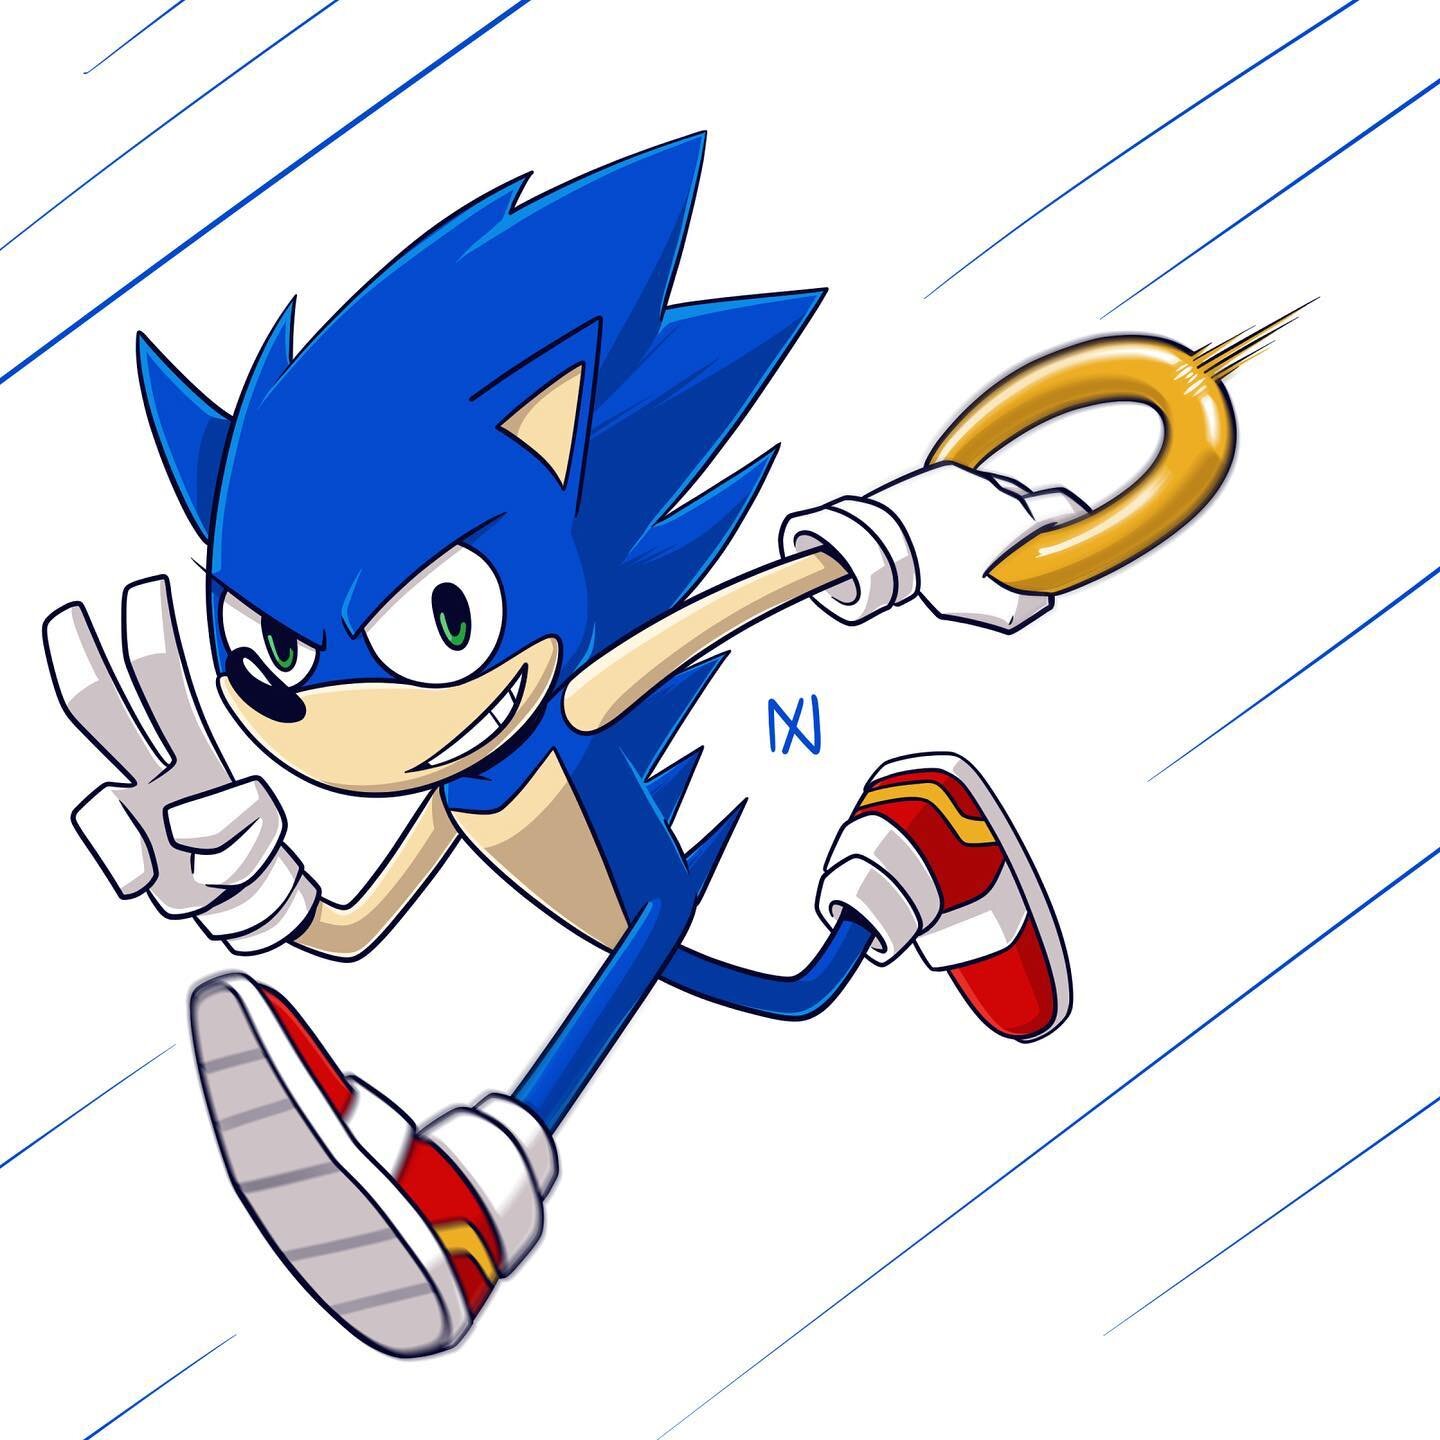 I&rsquo;m a little late to the Sonic party, but here&rsquo;s my take on the blue blur. #sonic #sonicthehedgehog 
.
#sonicfanart #sega #videogames #drawing #sketch #fanart #cartoon